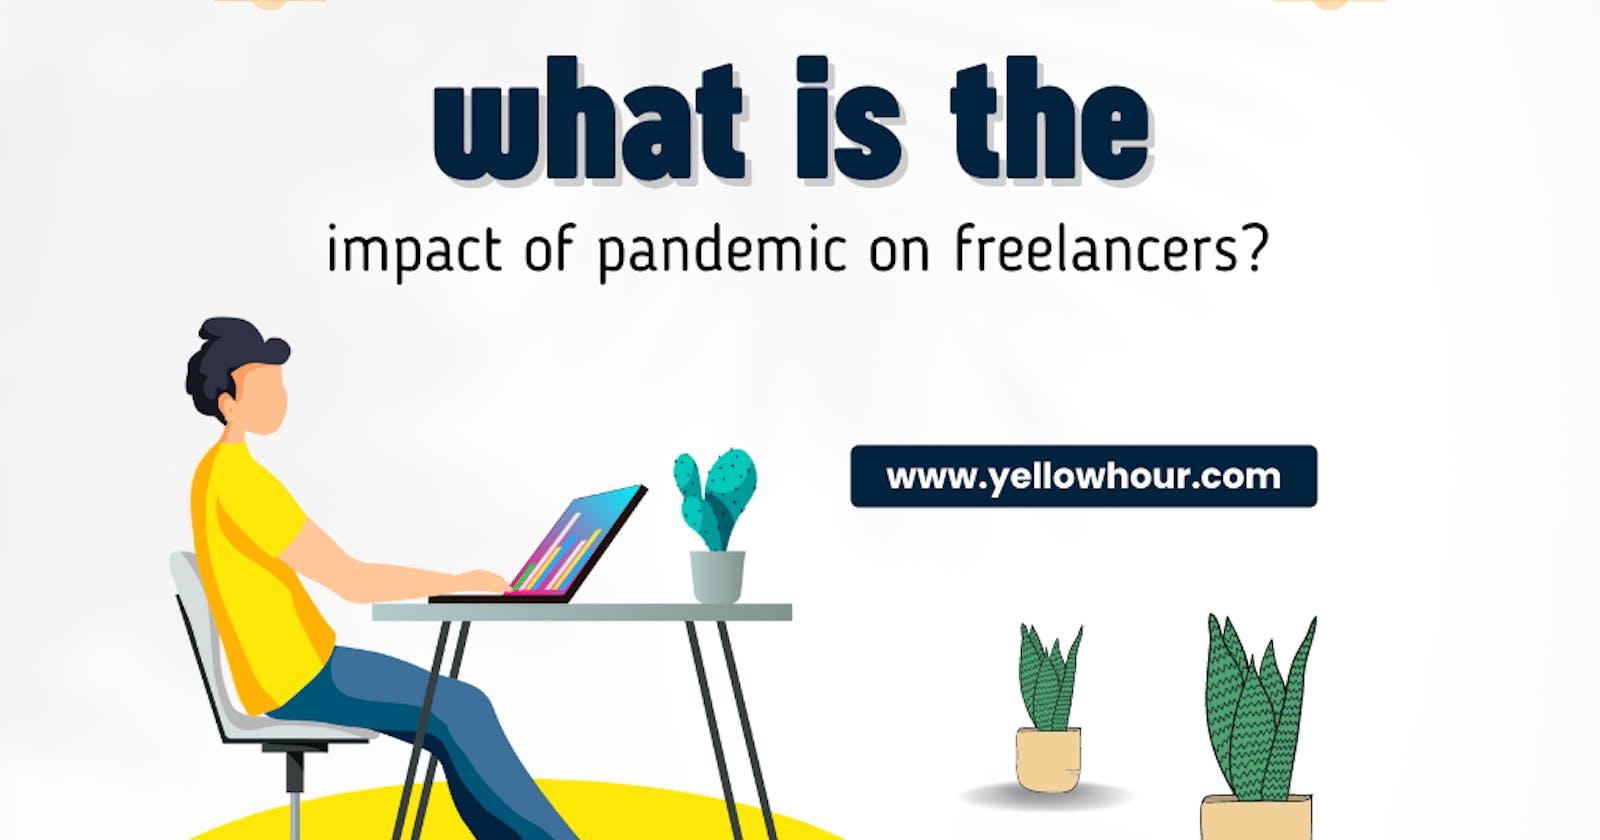 What is the impact of pandemic on freelancers?